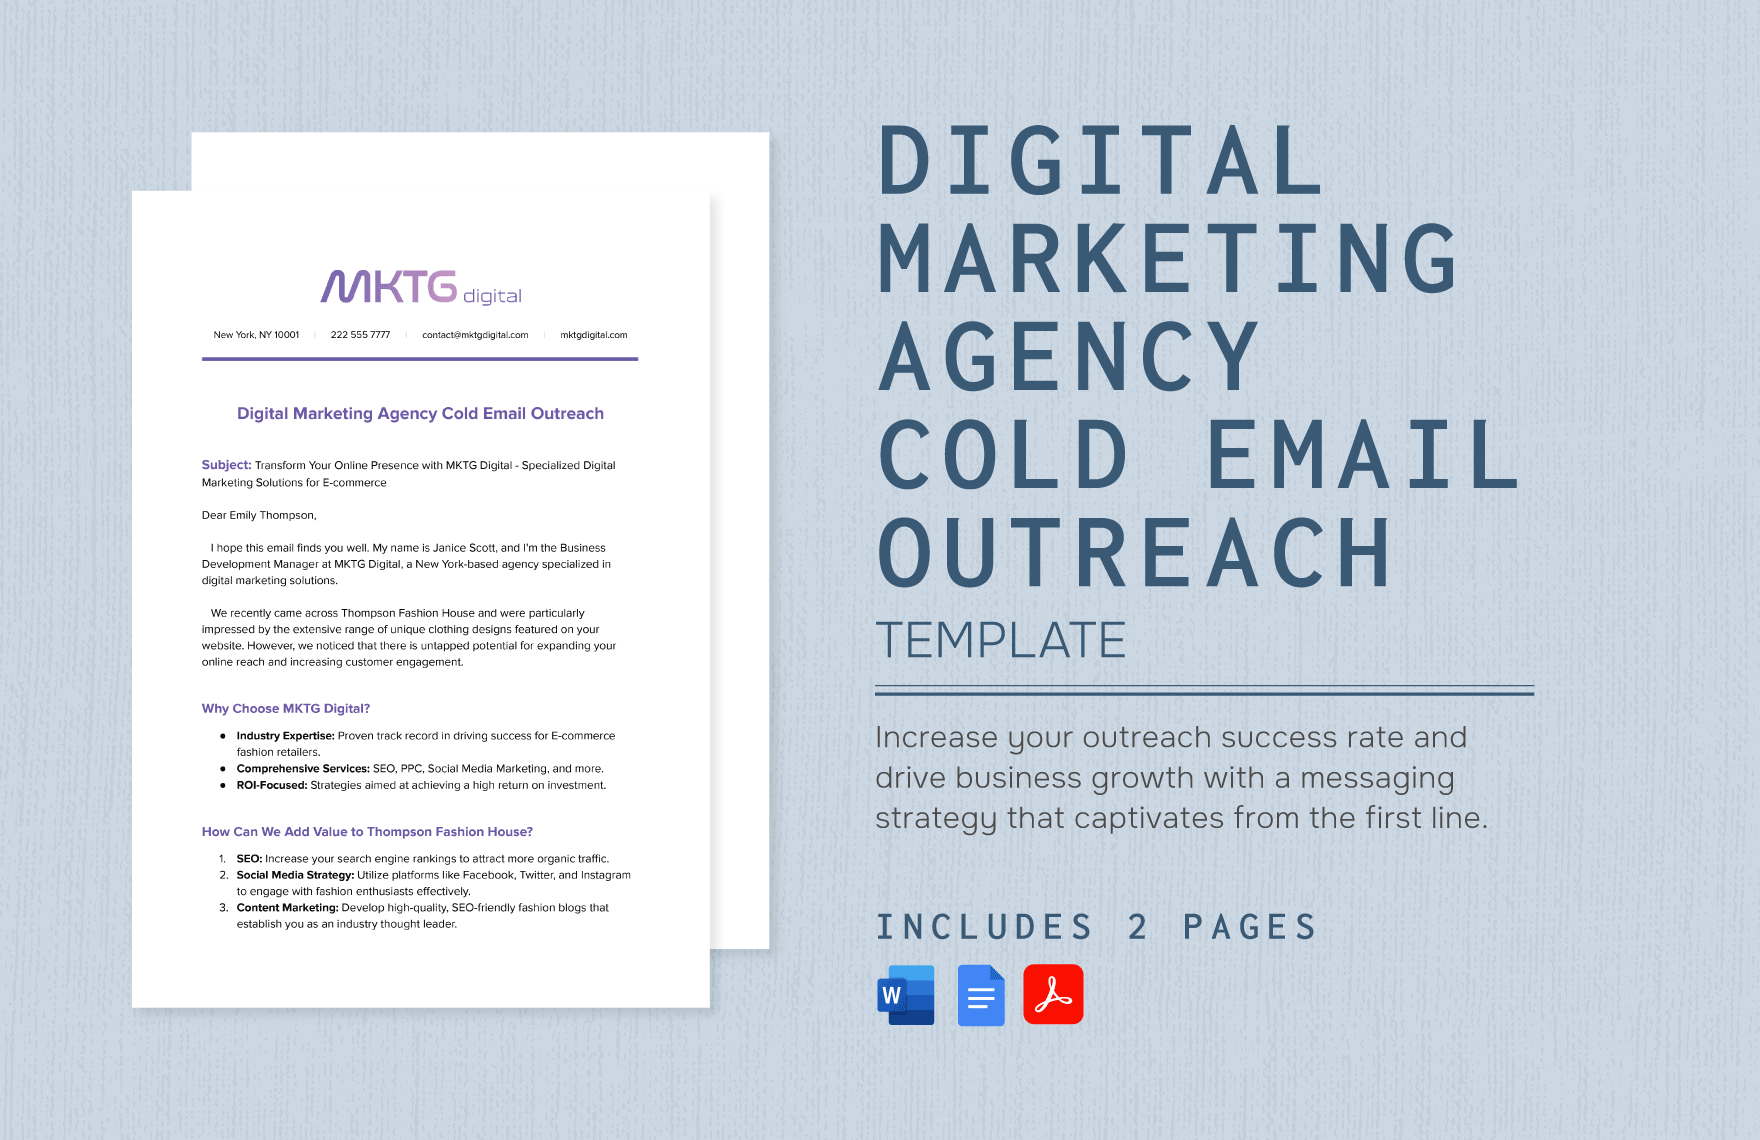 Digital Marketing Agency Cold Email Outreach Template